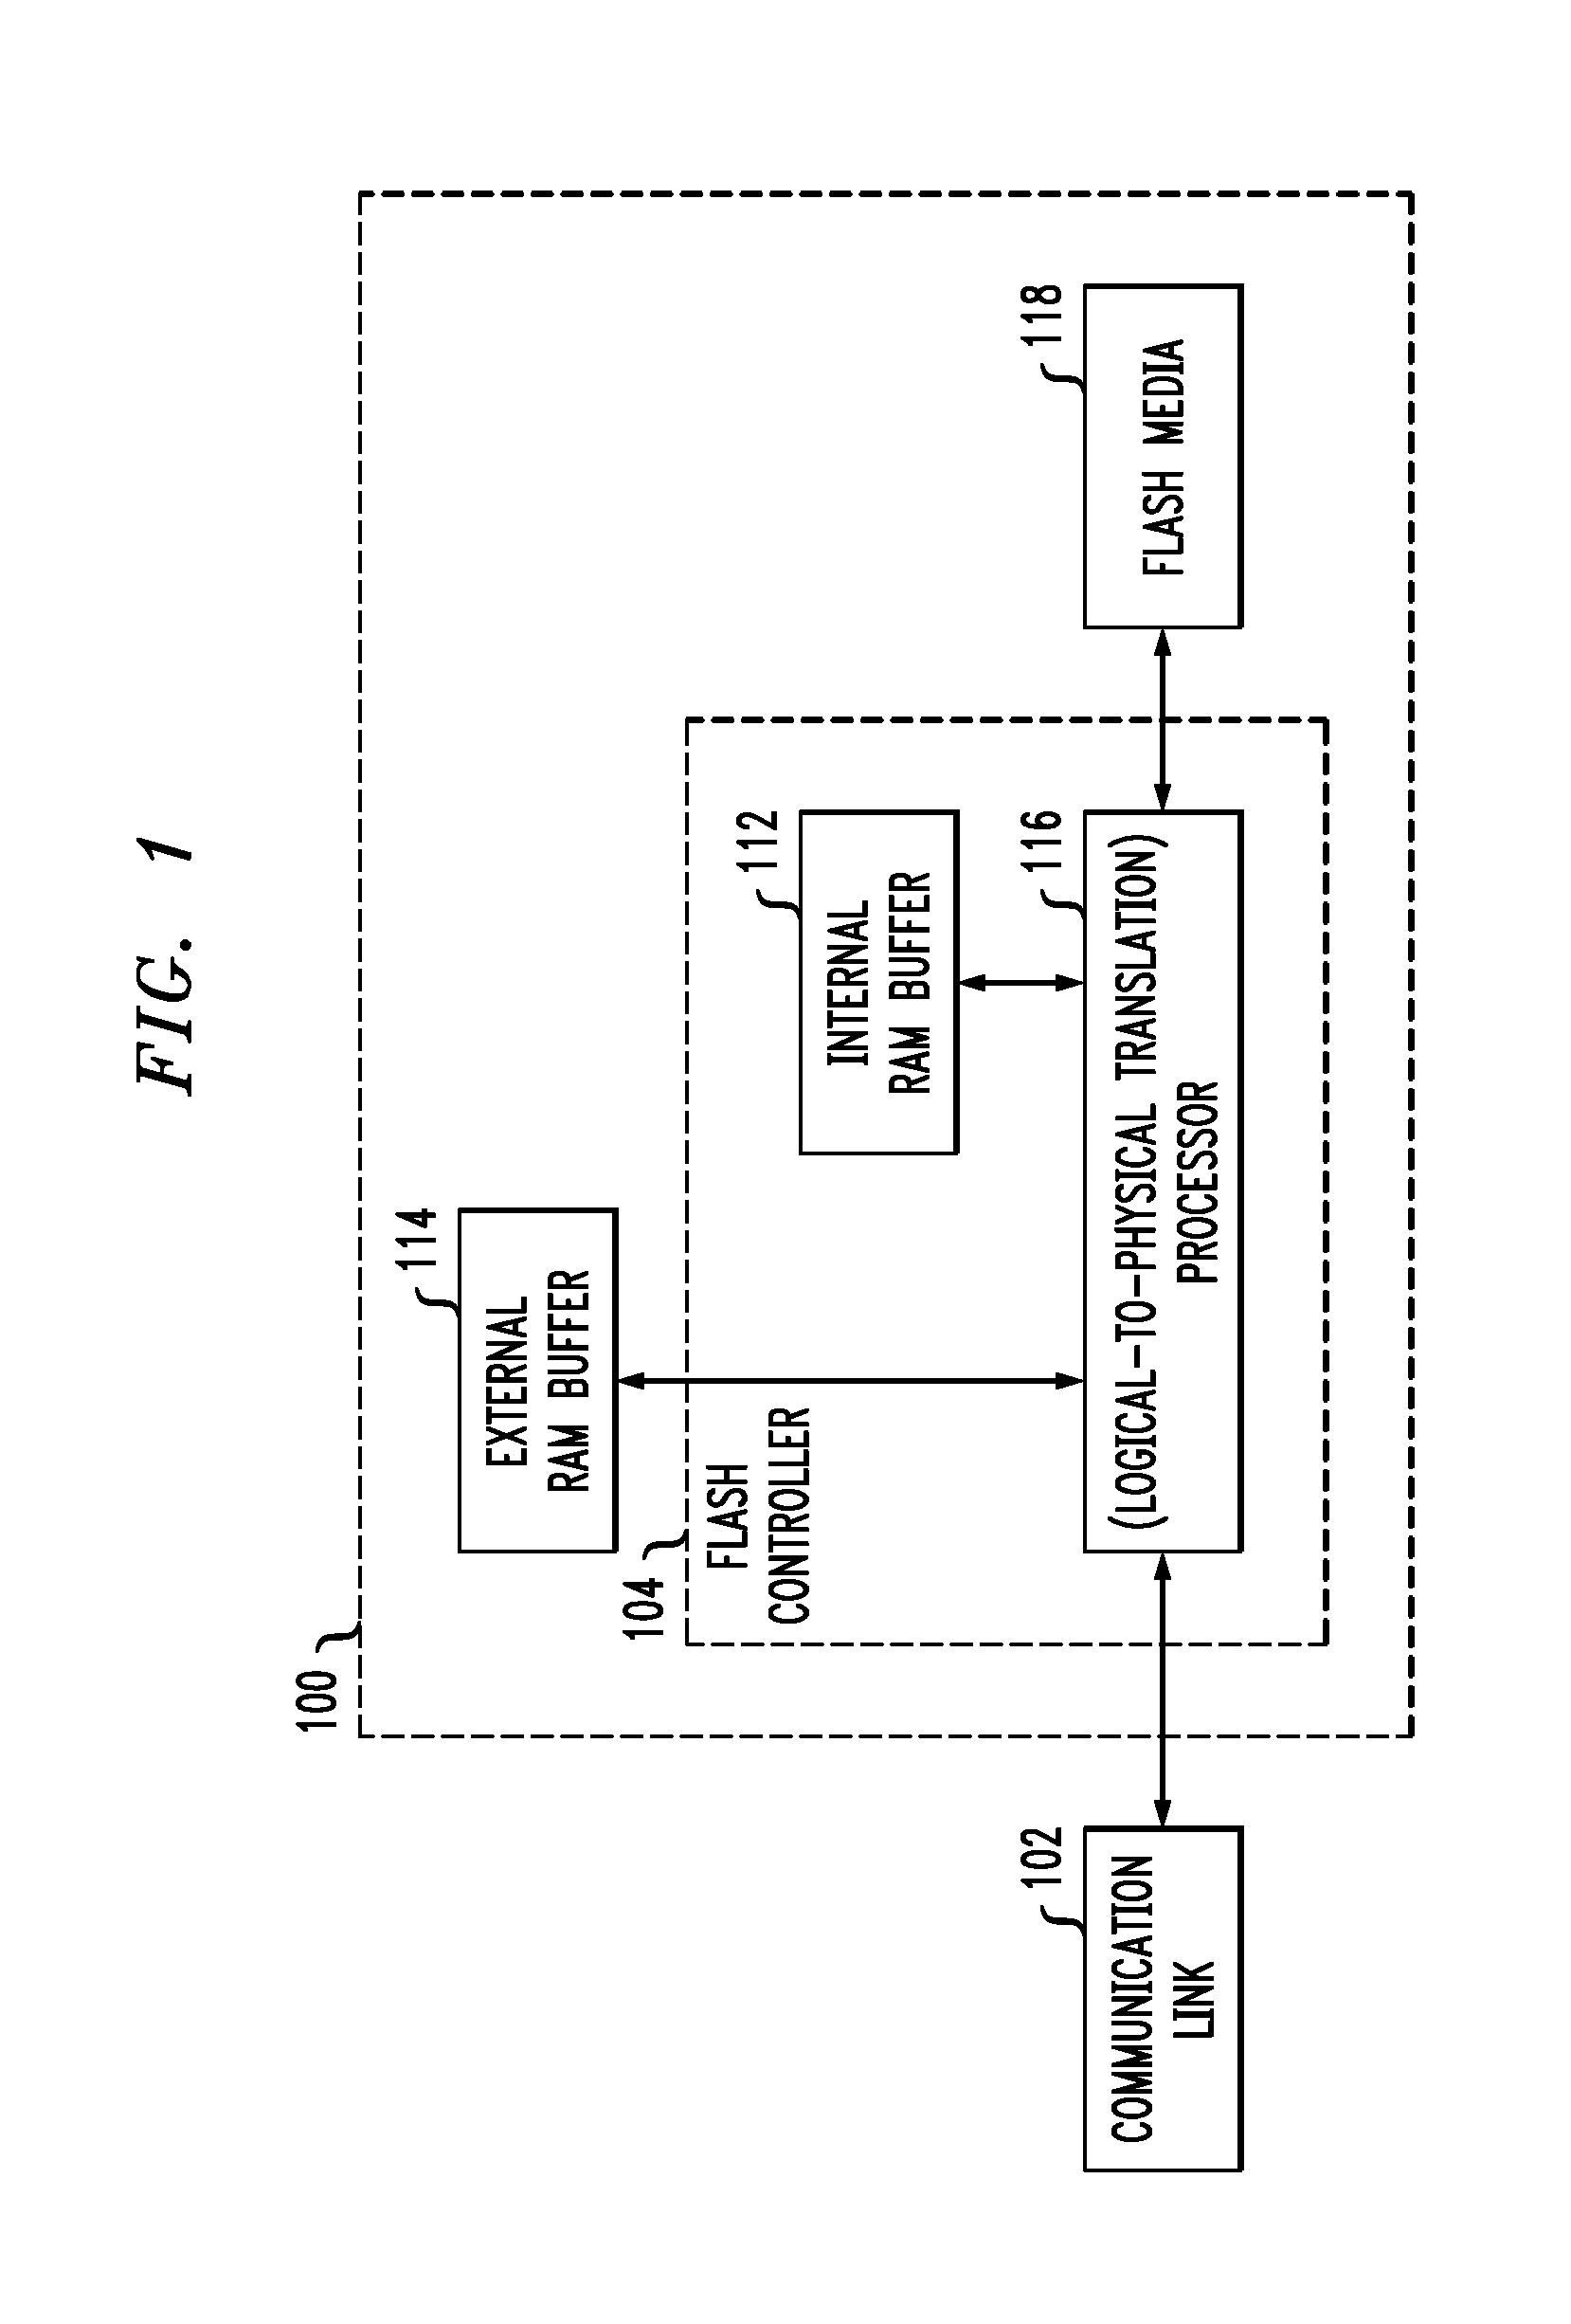 Accessing logical-to-physical address translation data for solid state disks